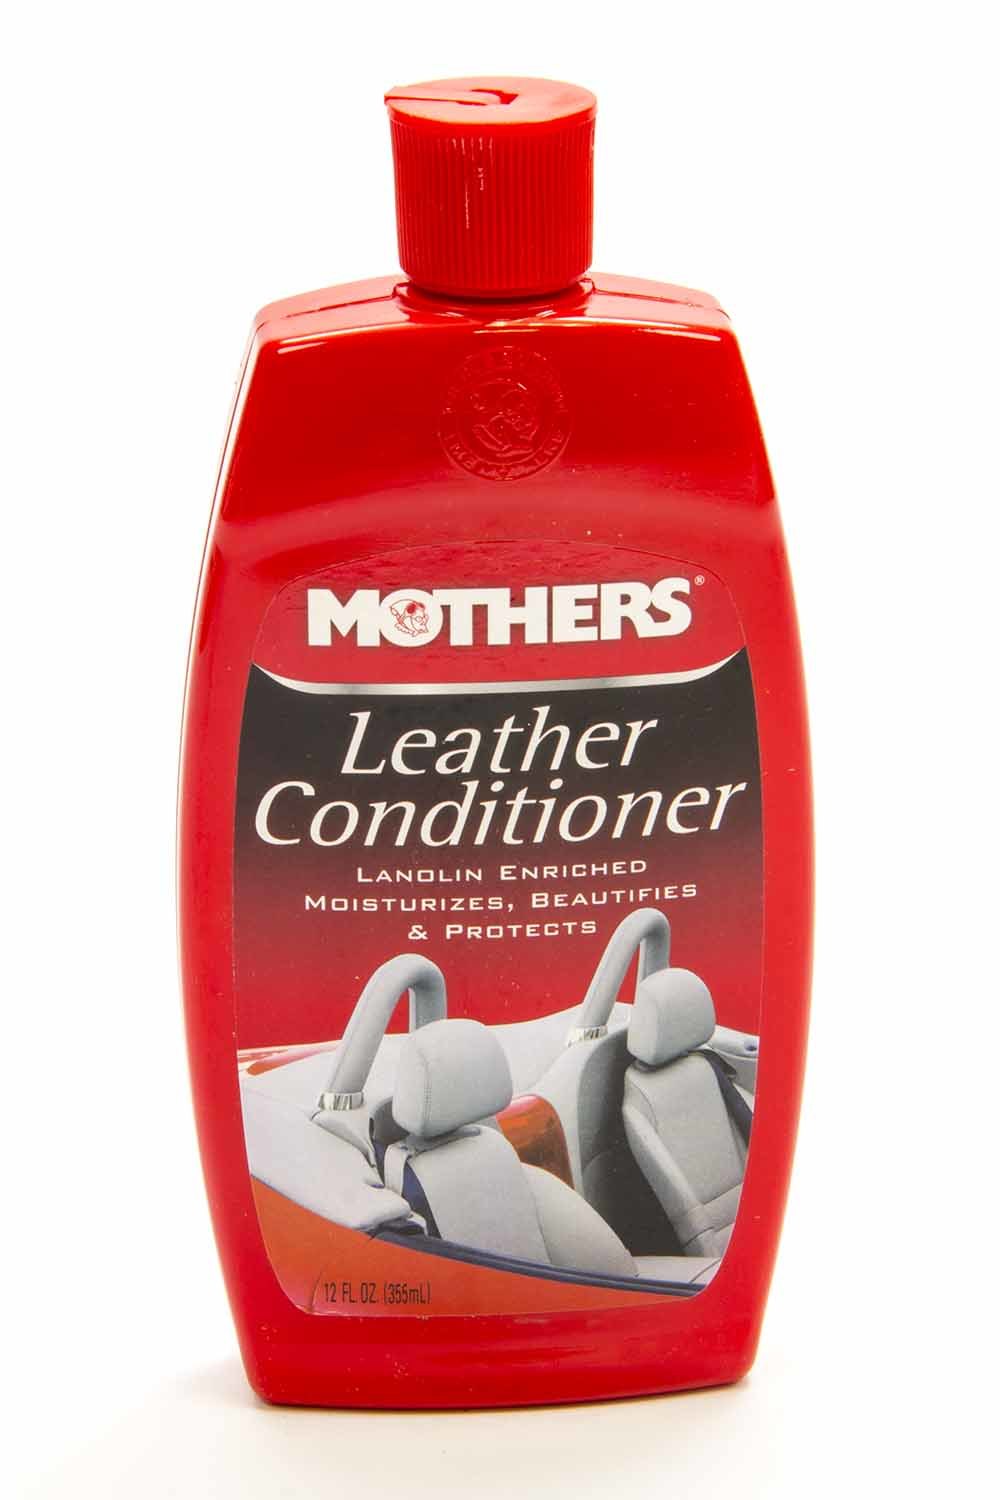 MOTHERS Leather Cleaner, Conditioner, 12 oz Bottle, Each